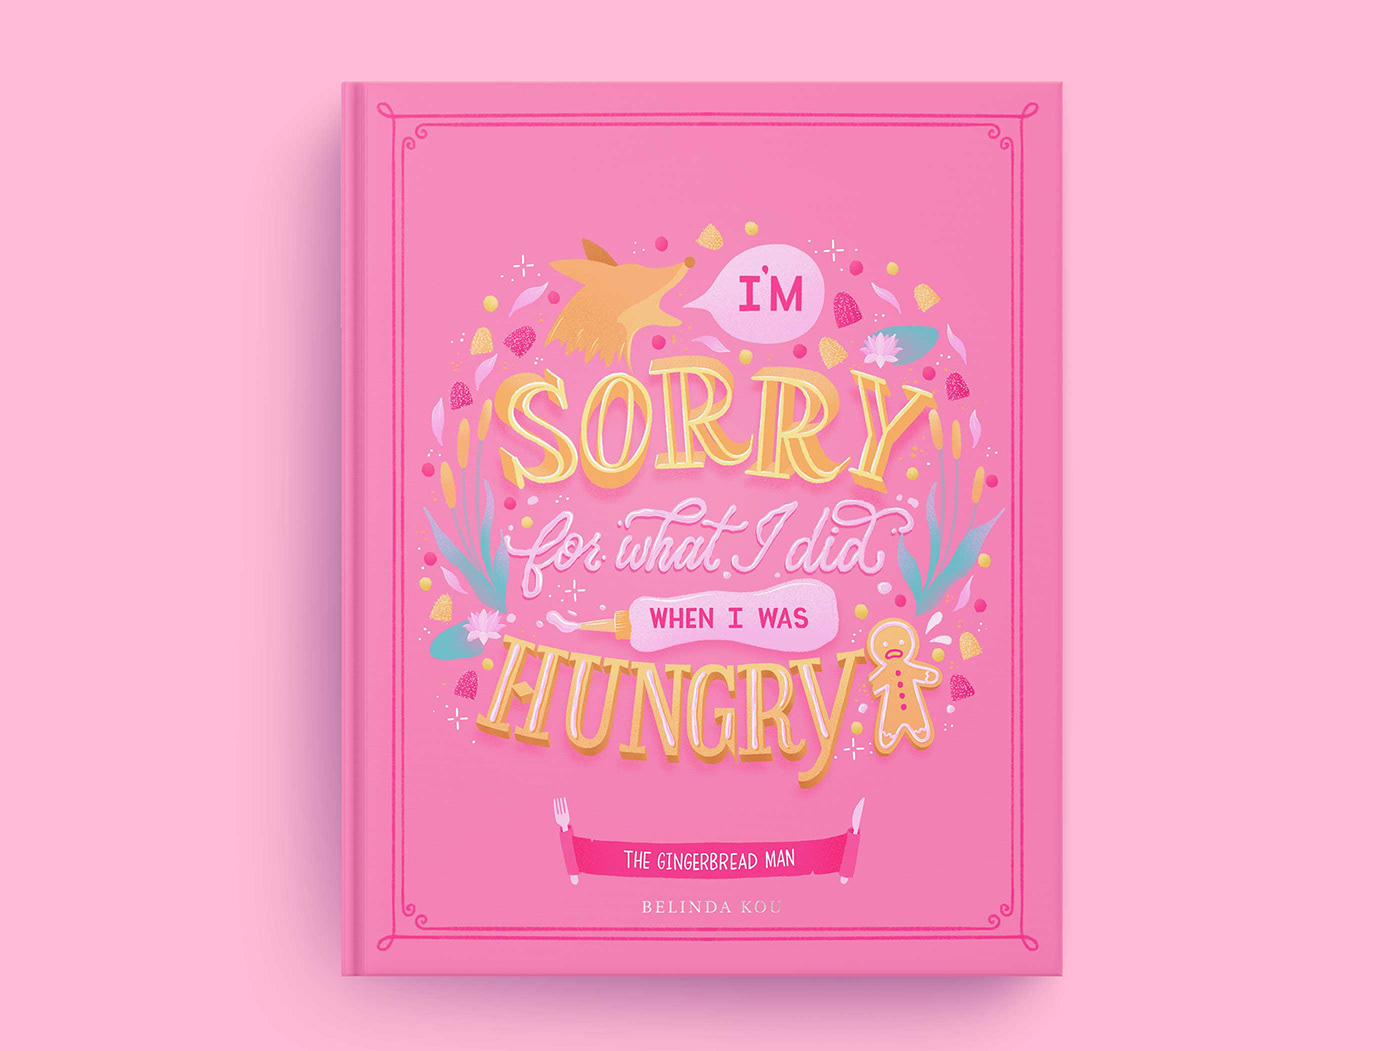 Gingerbread book cover art featuring hand lettering and illustrations of fairy tale and food art